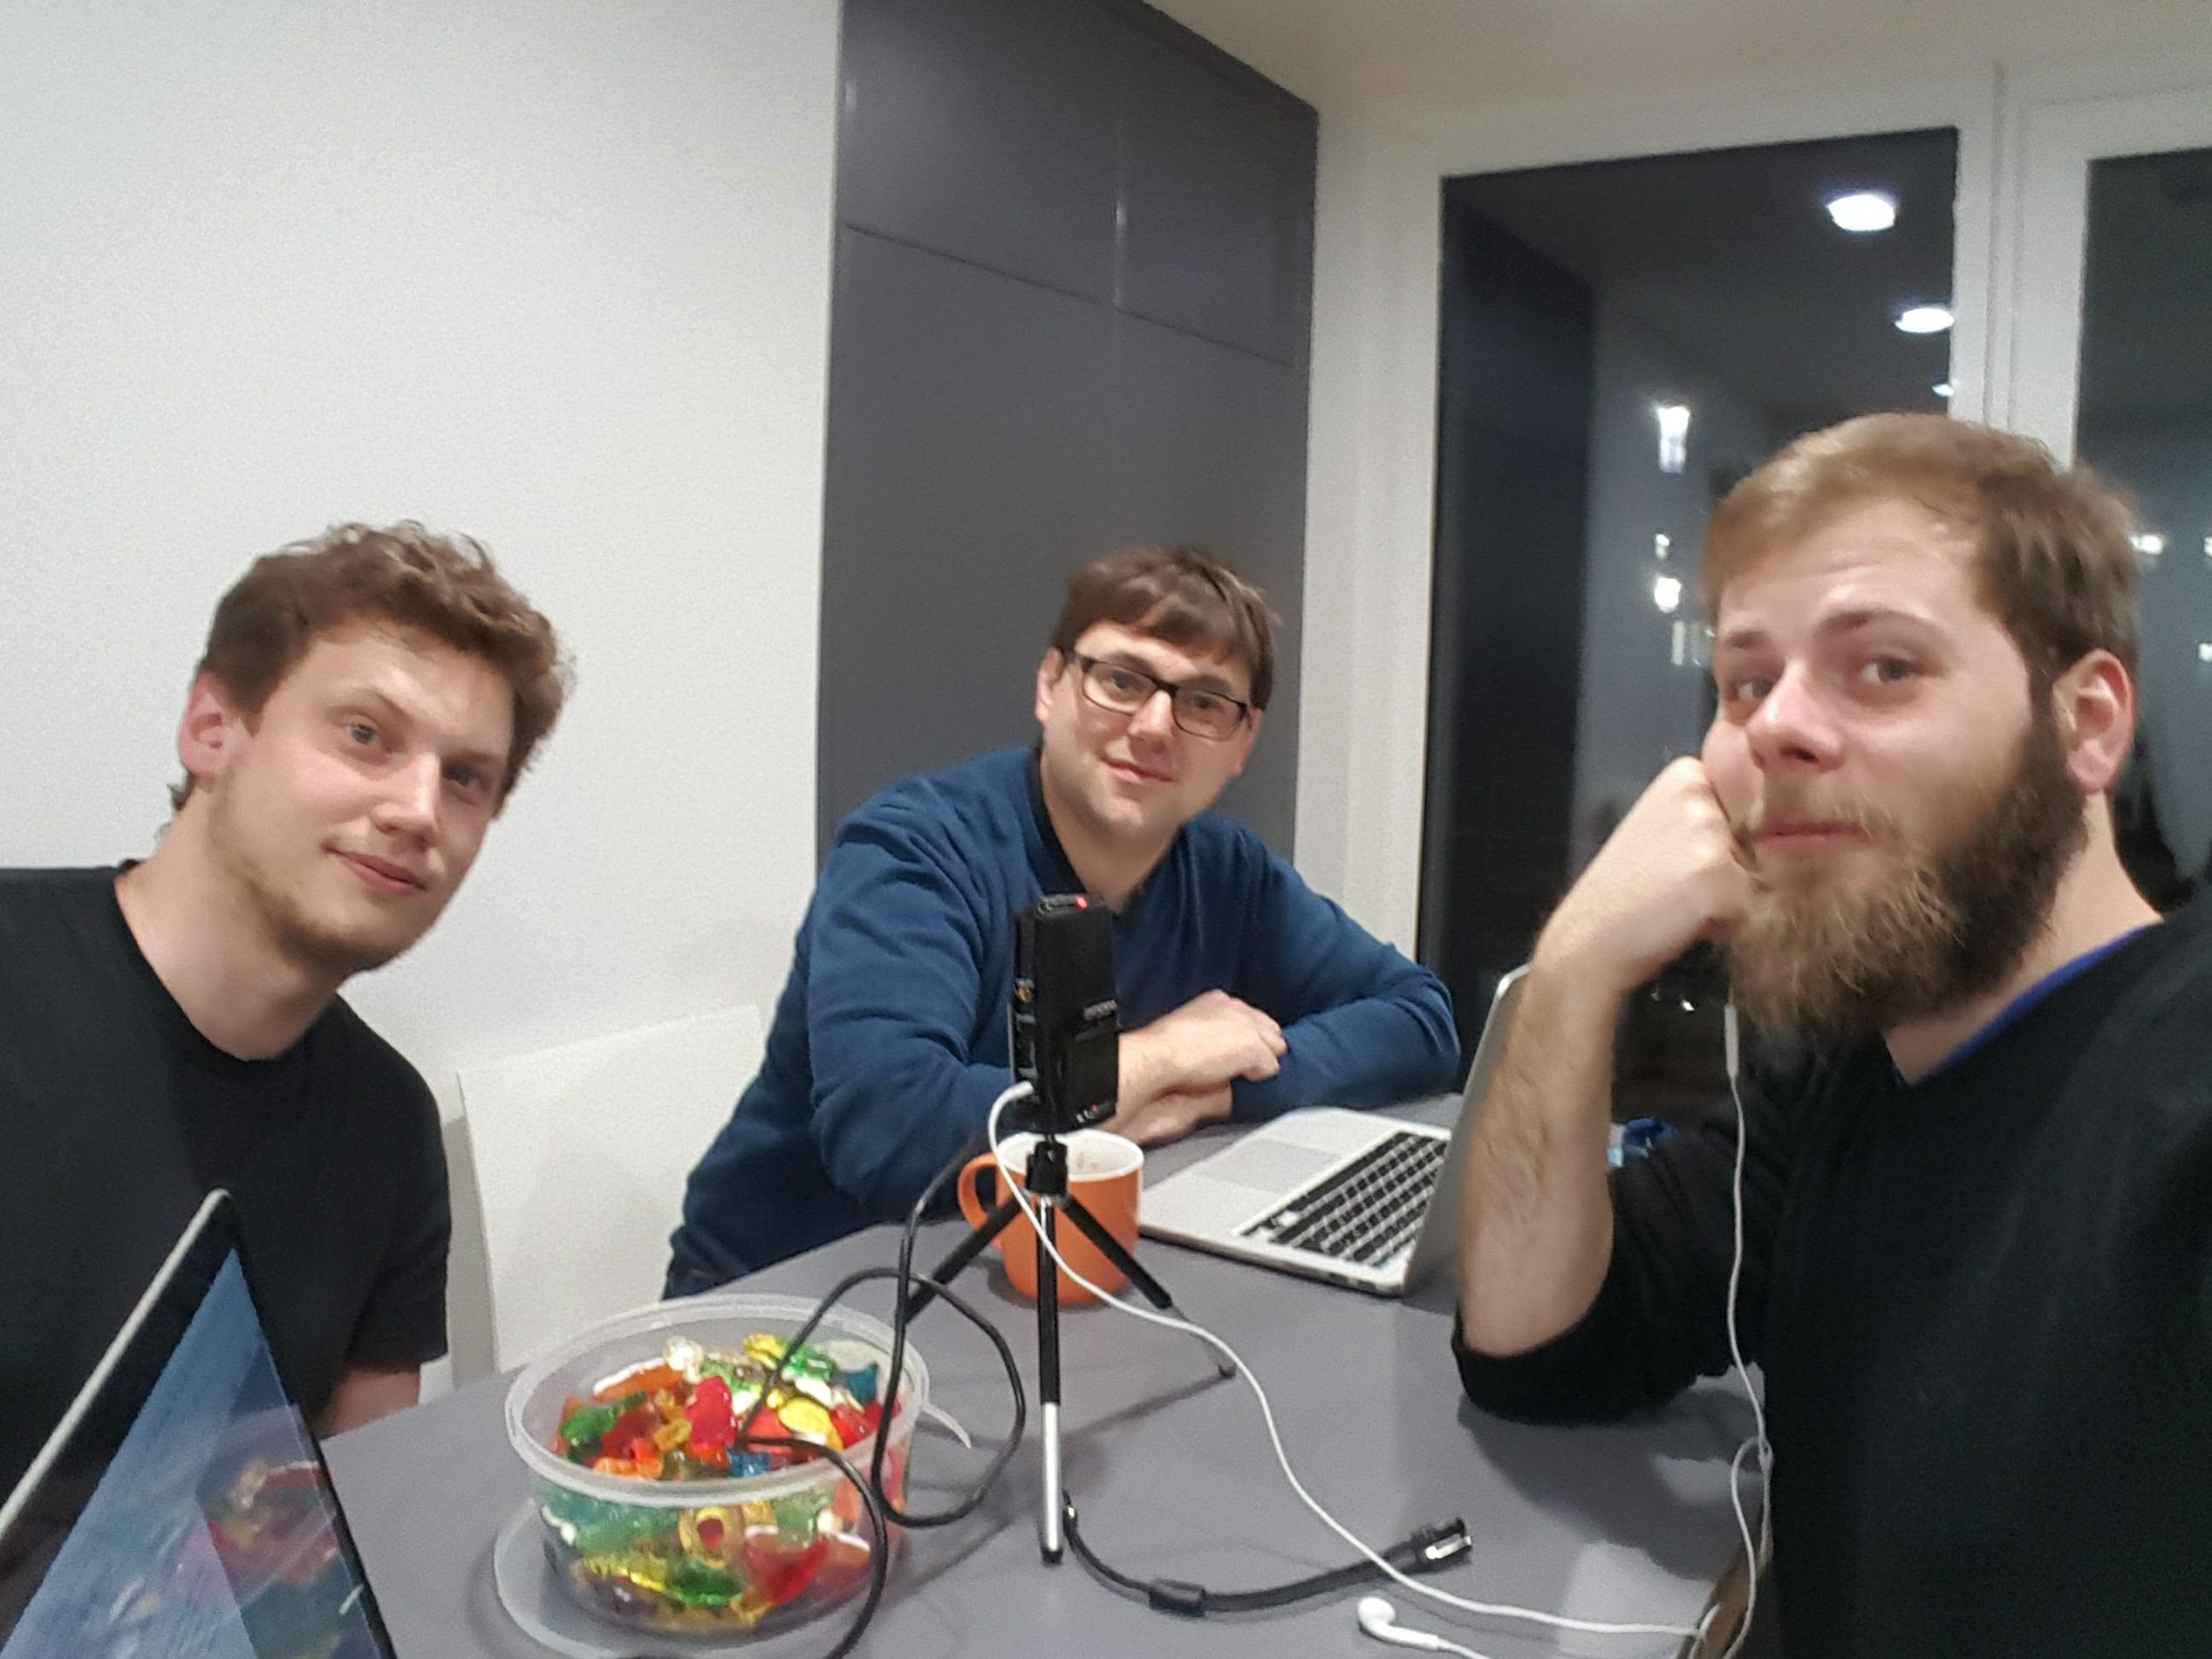 Episode 31 in progress with our lovely guest, Rolf Behrens from BITNAMIC